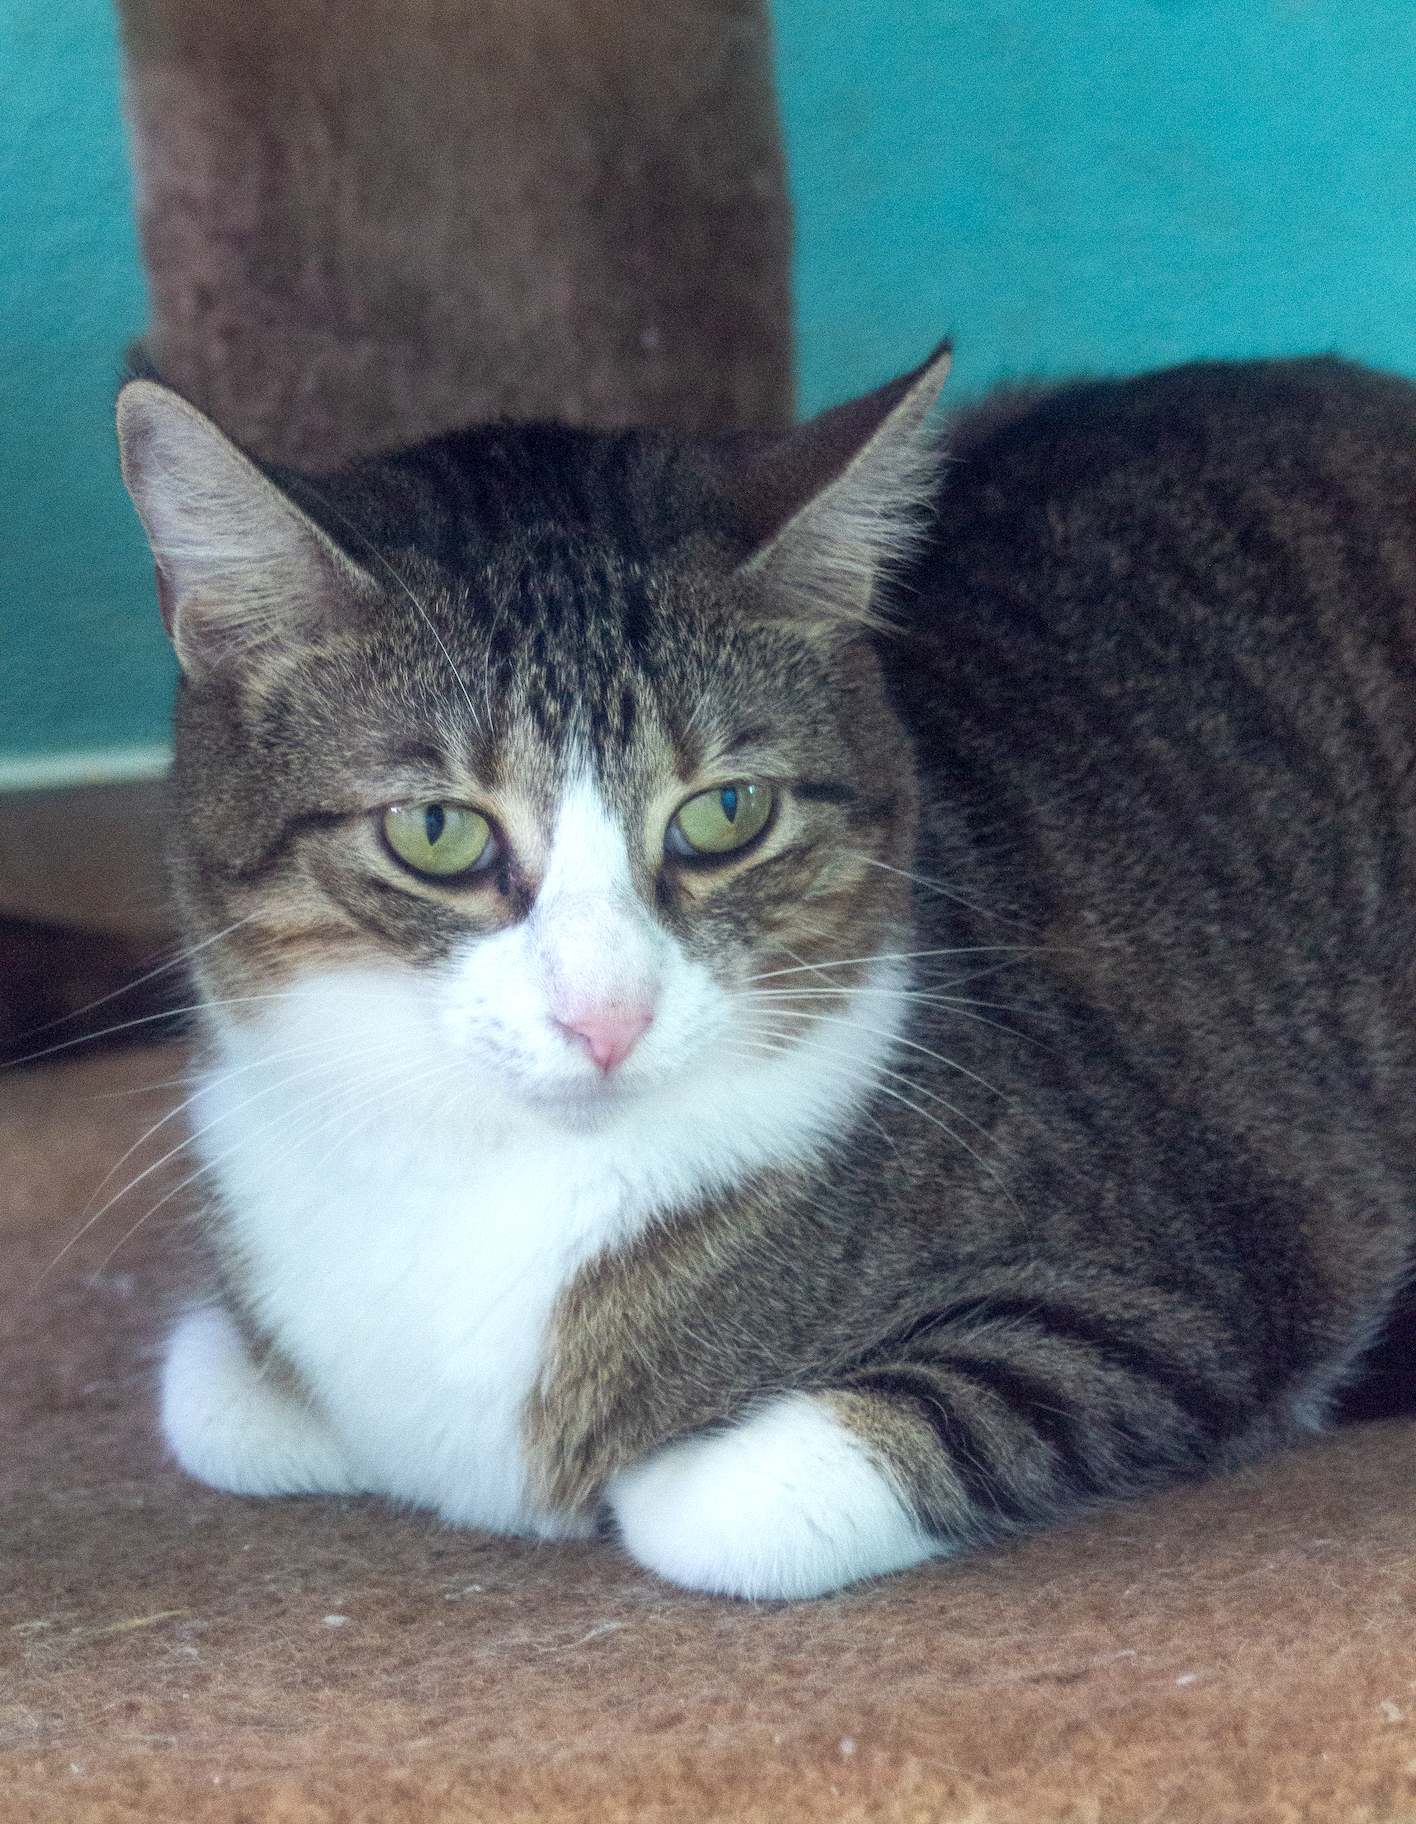 Luisa, a beautiful gray tabby with green eyes.